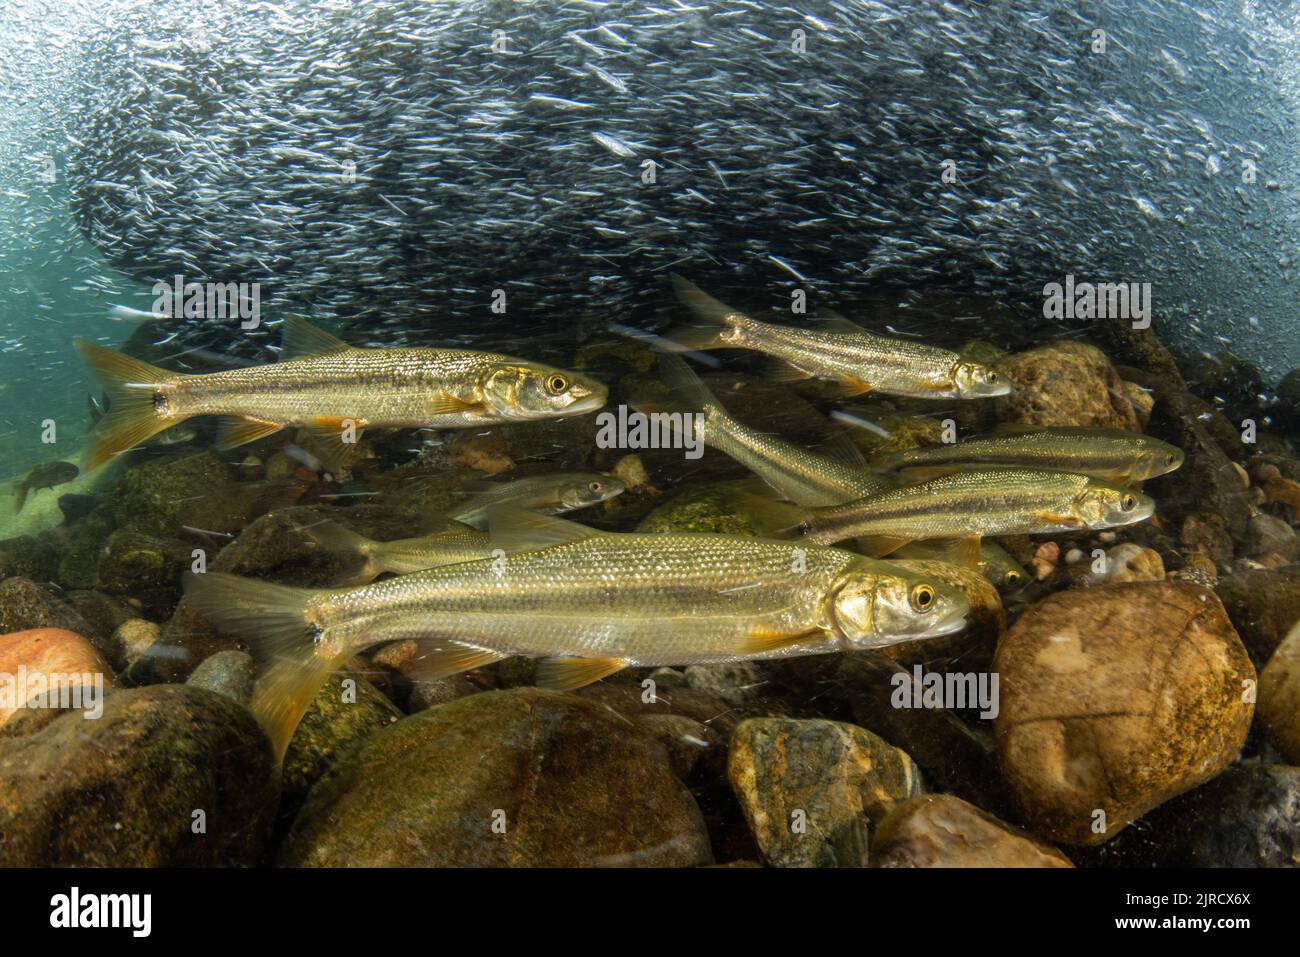 Sacramento pikeminnow (Ptychocheilus grandis), a freshwater fish from a river in the Sierra Nevada mountains of California, USA. Stock Photo